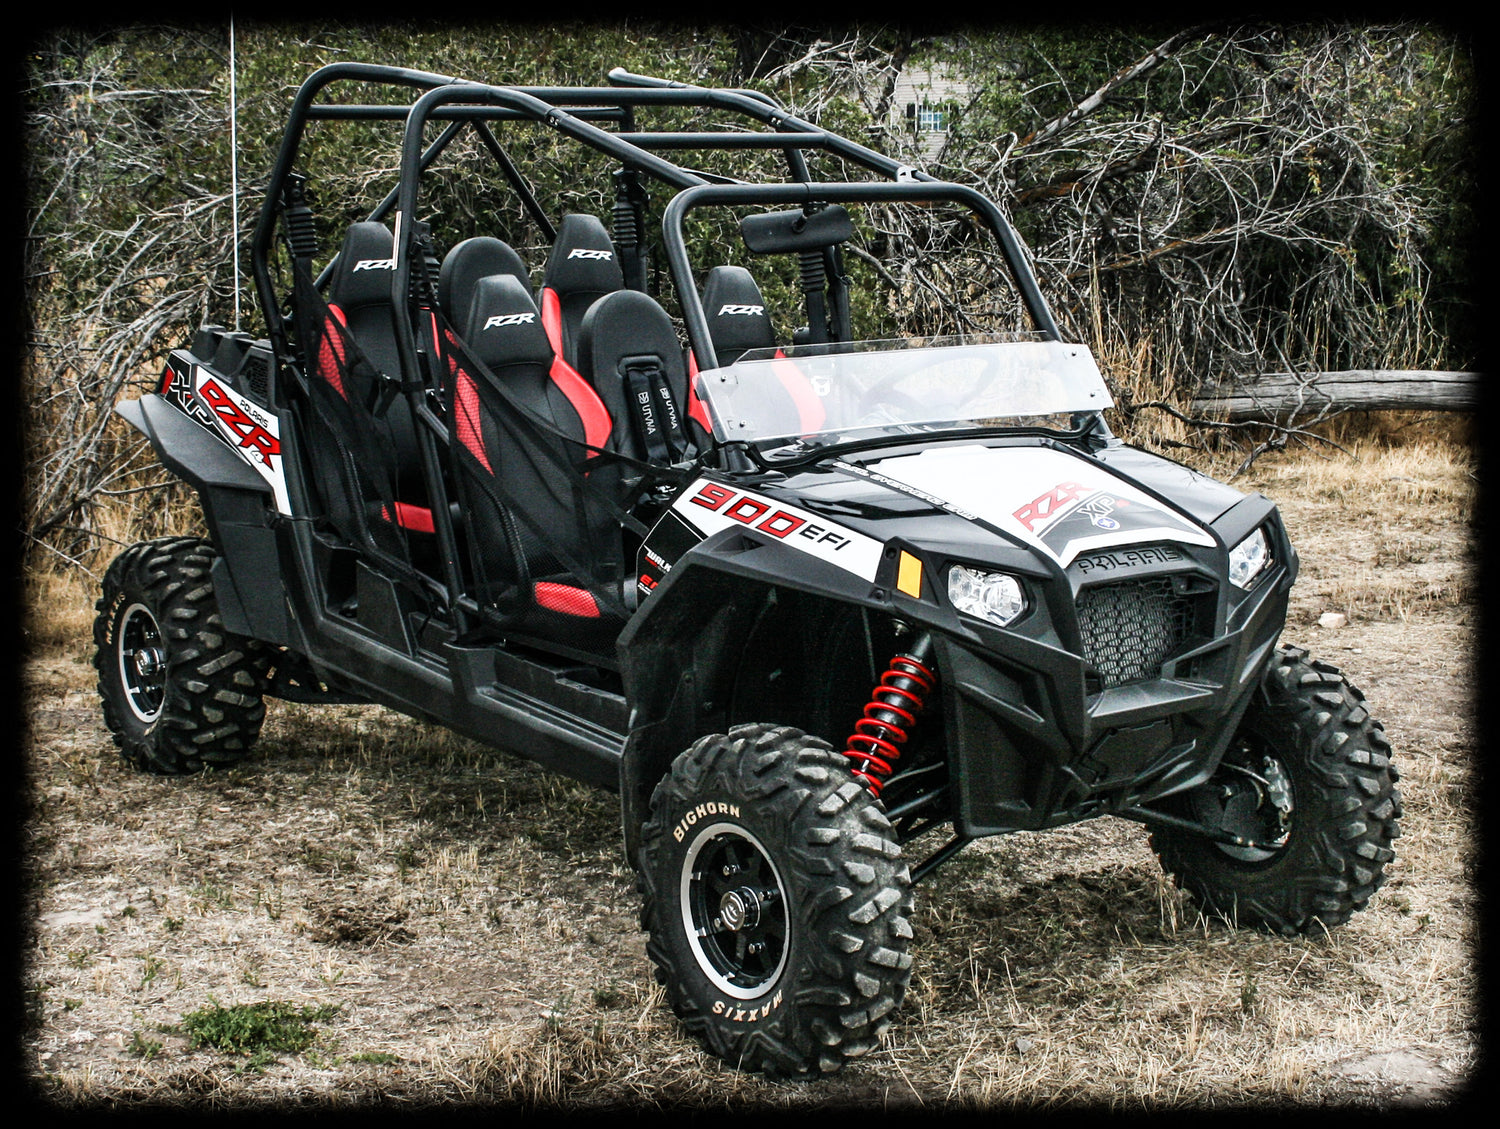 RZR 4 800 Bump Seats (Front and Rear)